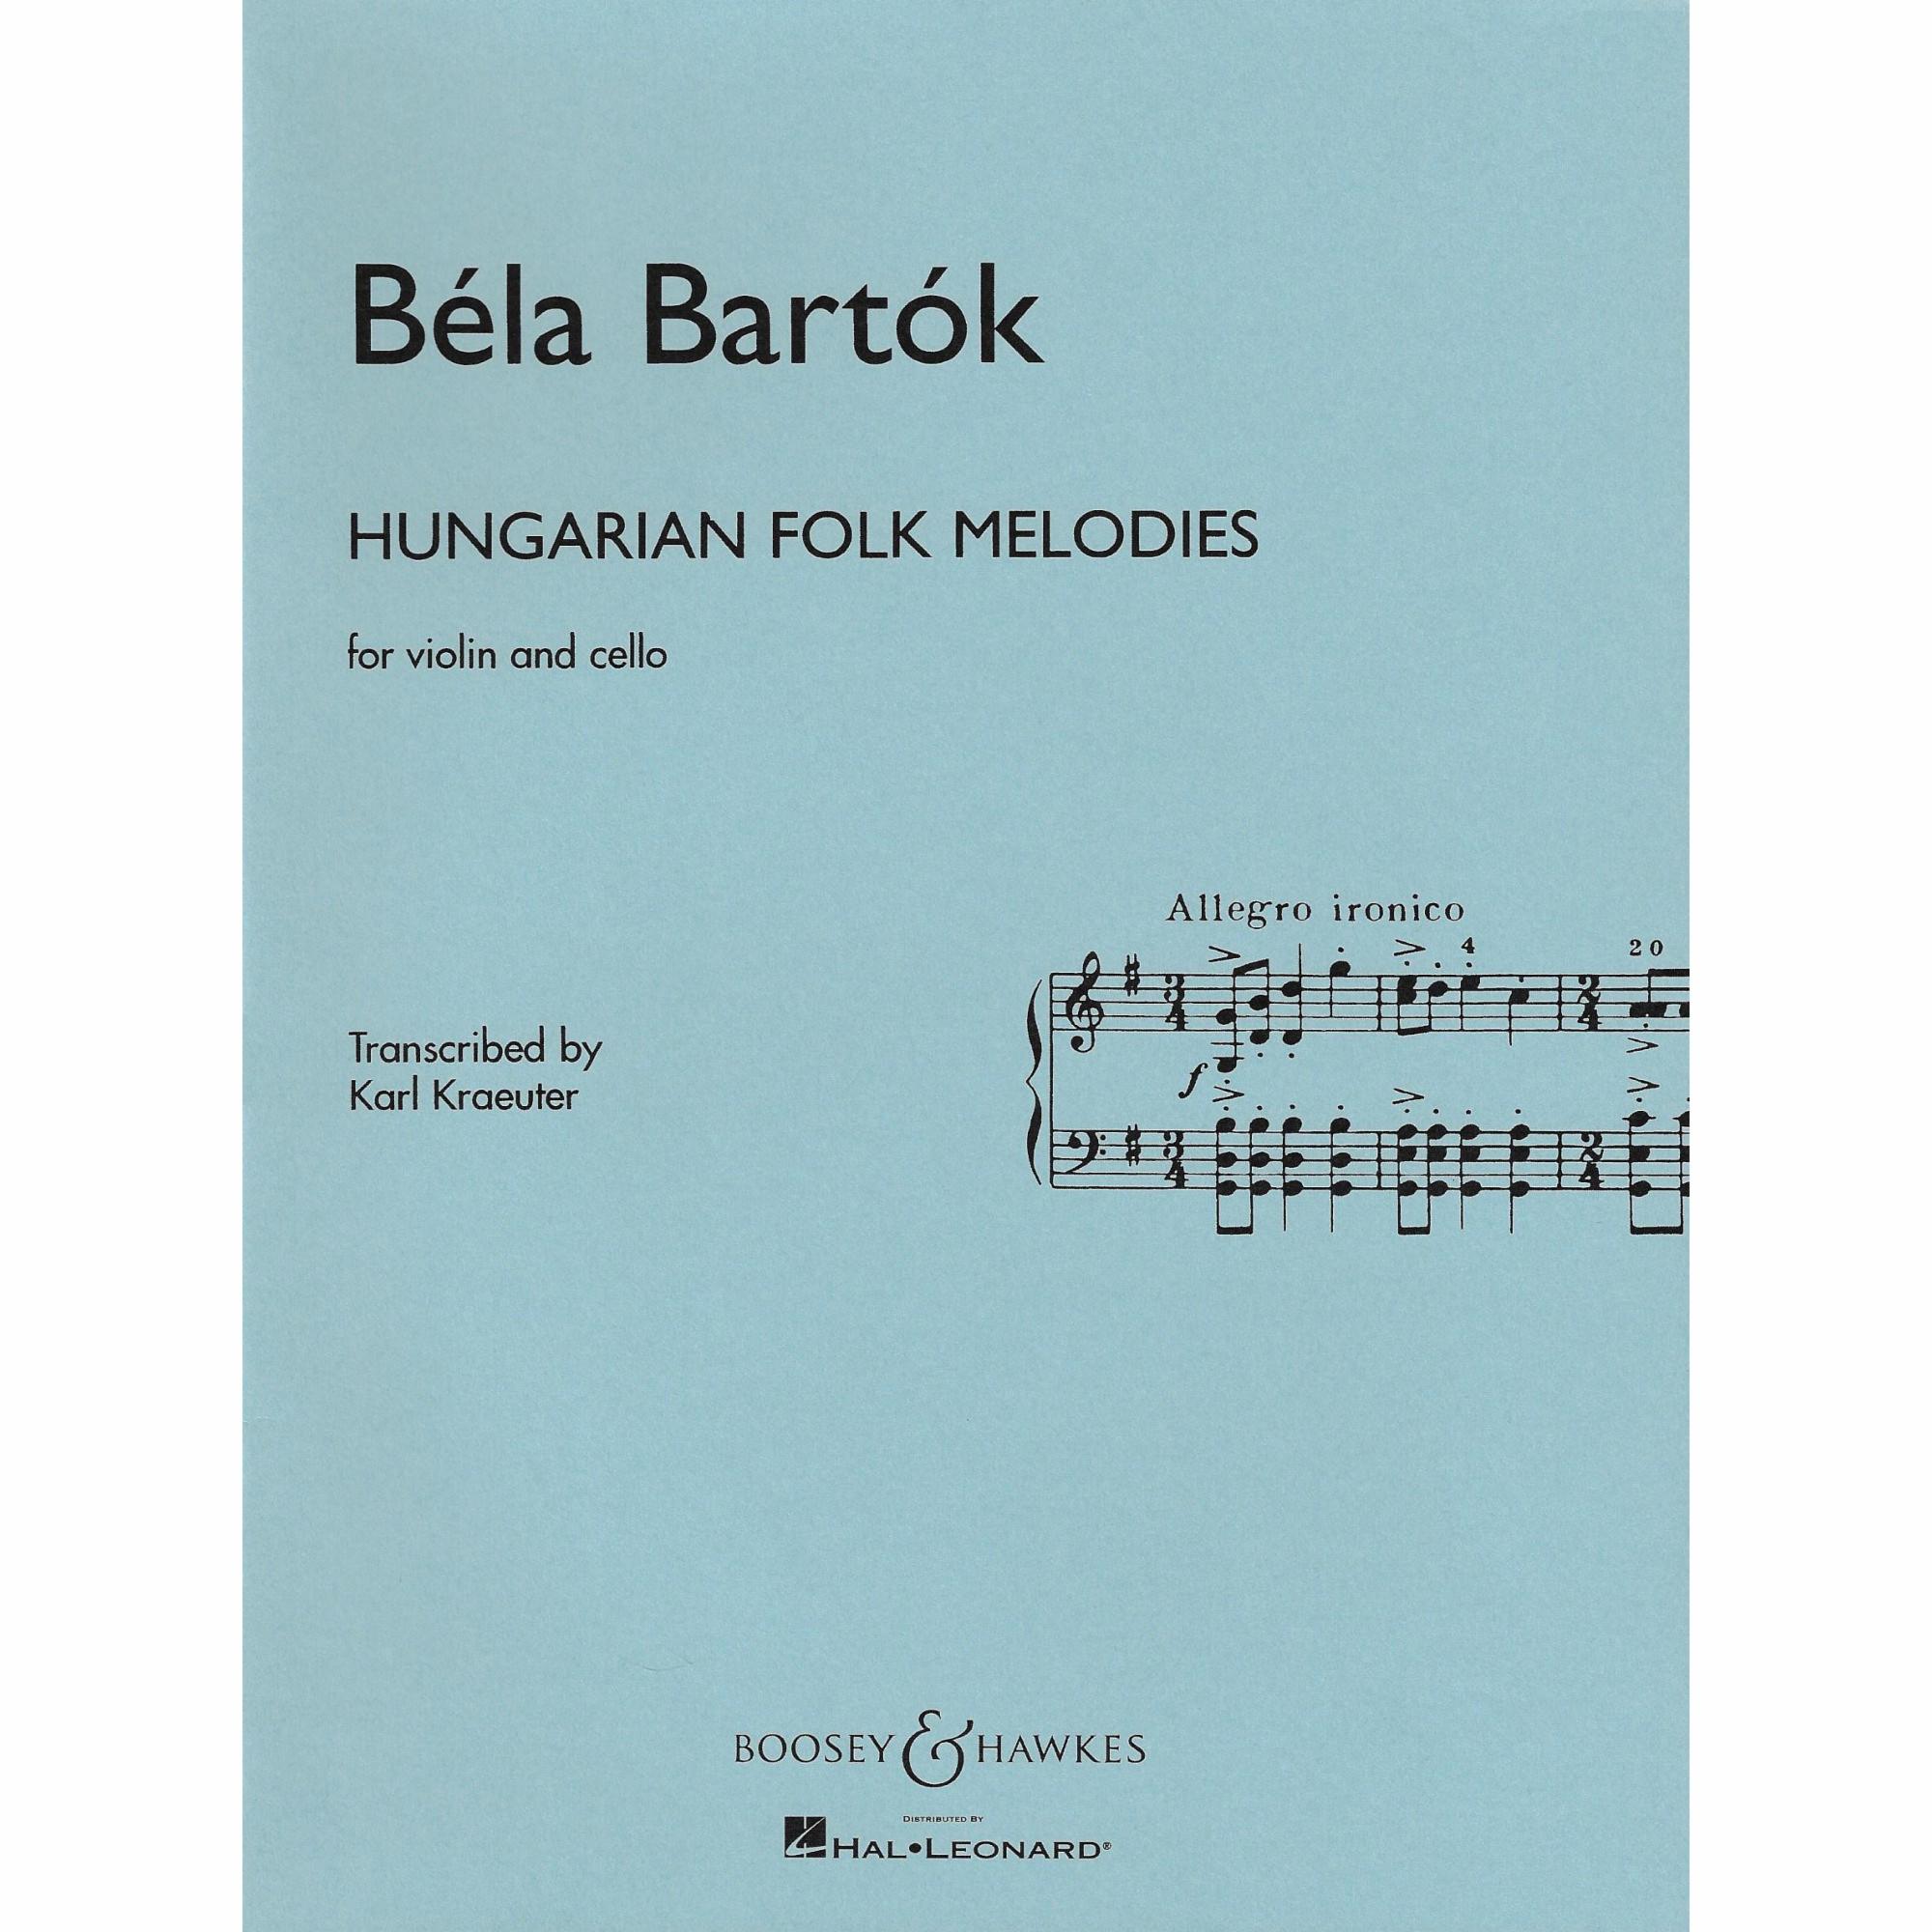 Bartok -- Hungarian Folk Melodies for Violin and Cello